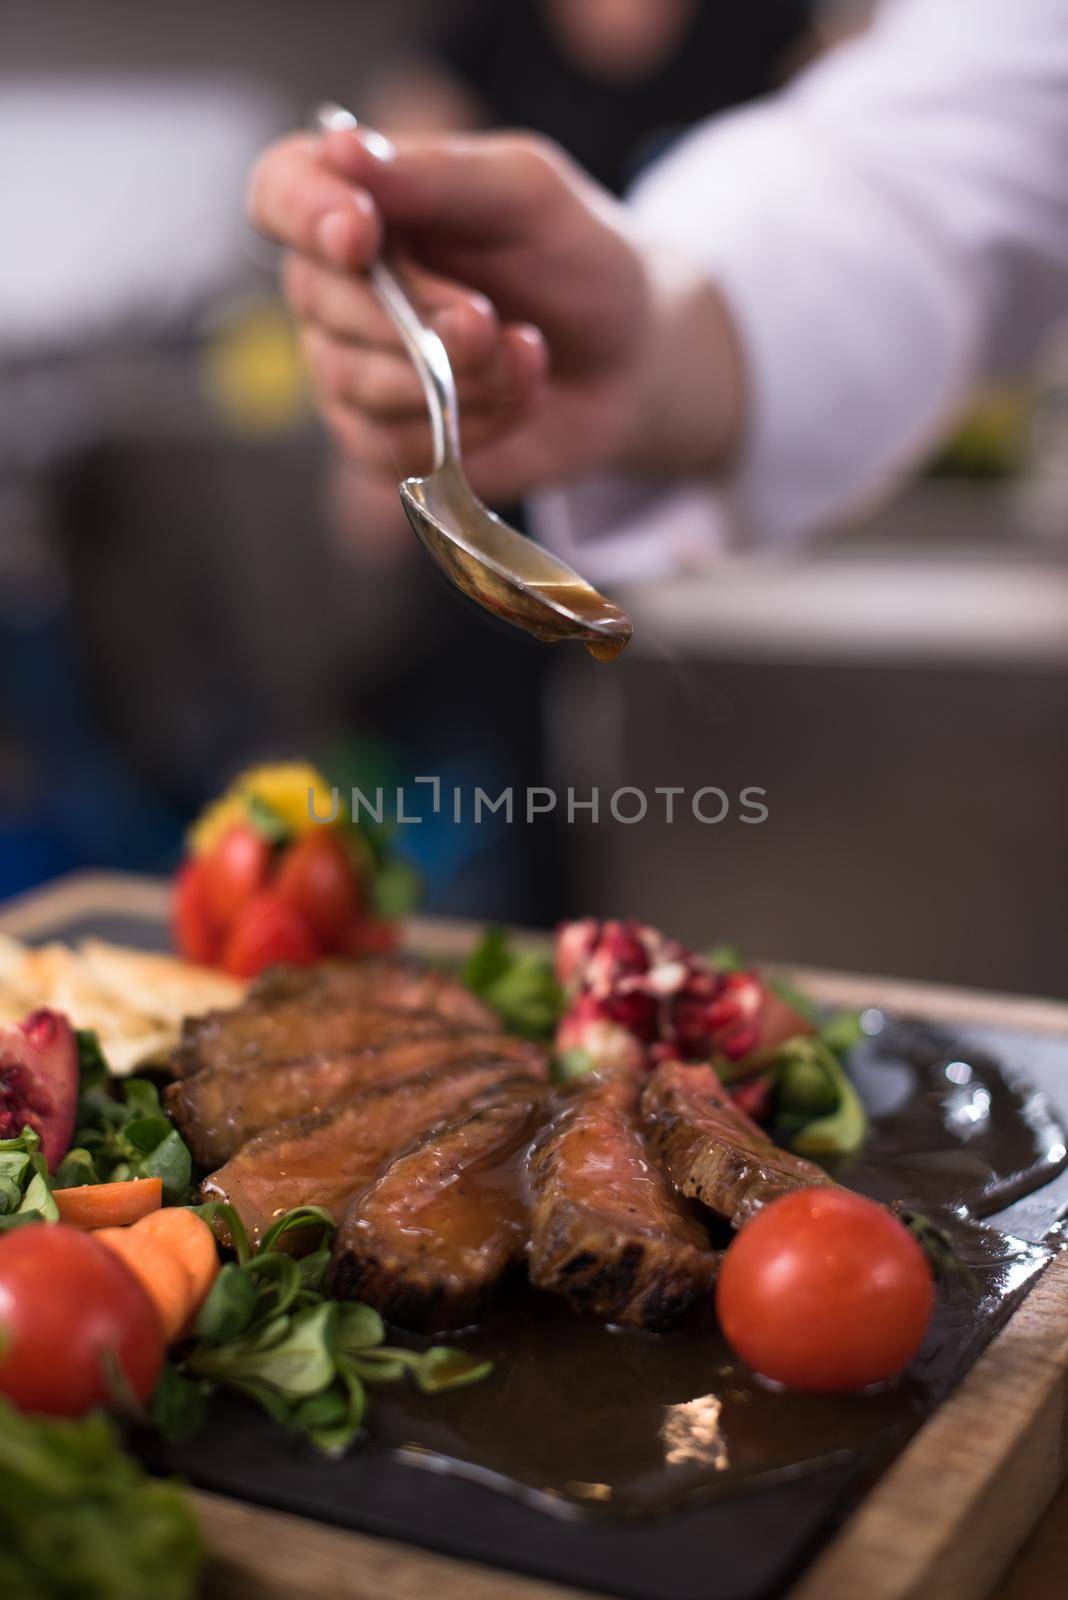 Chef hand finishing steak meat plate by dotshock